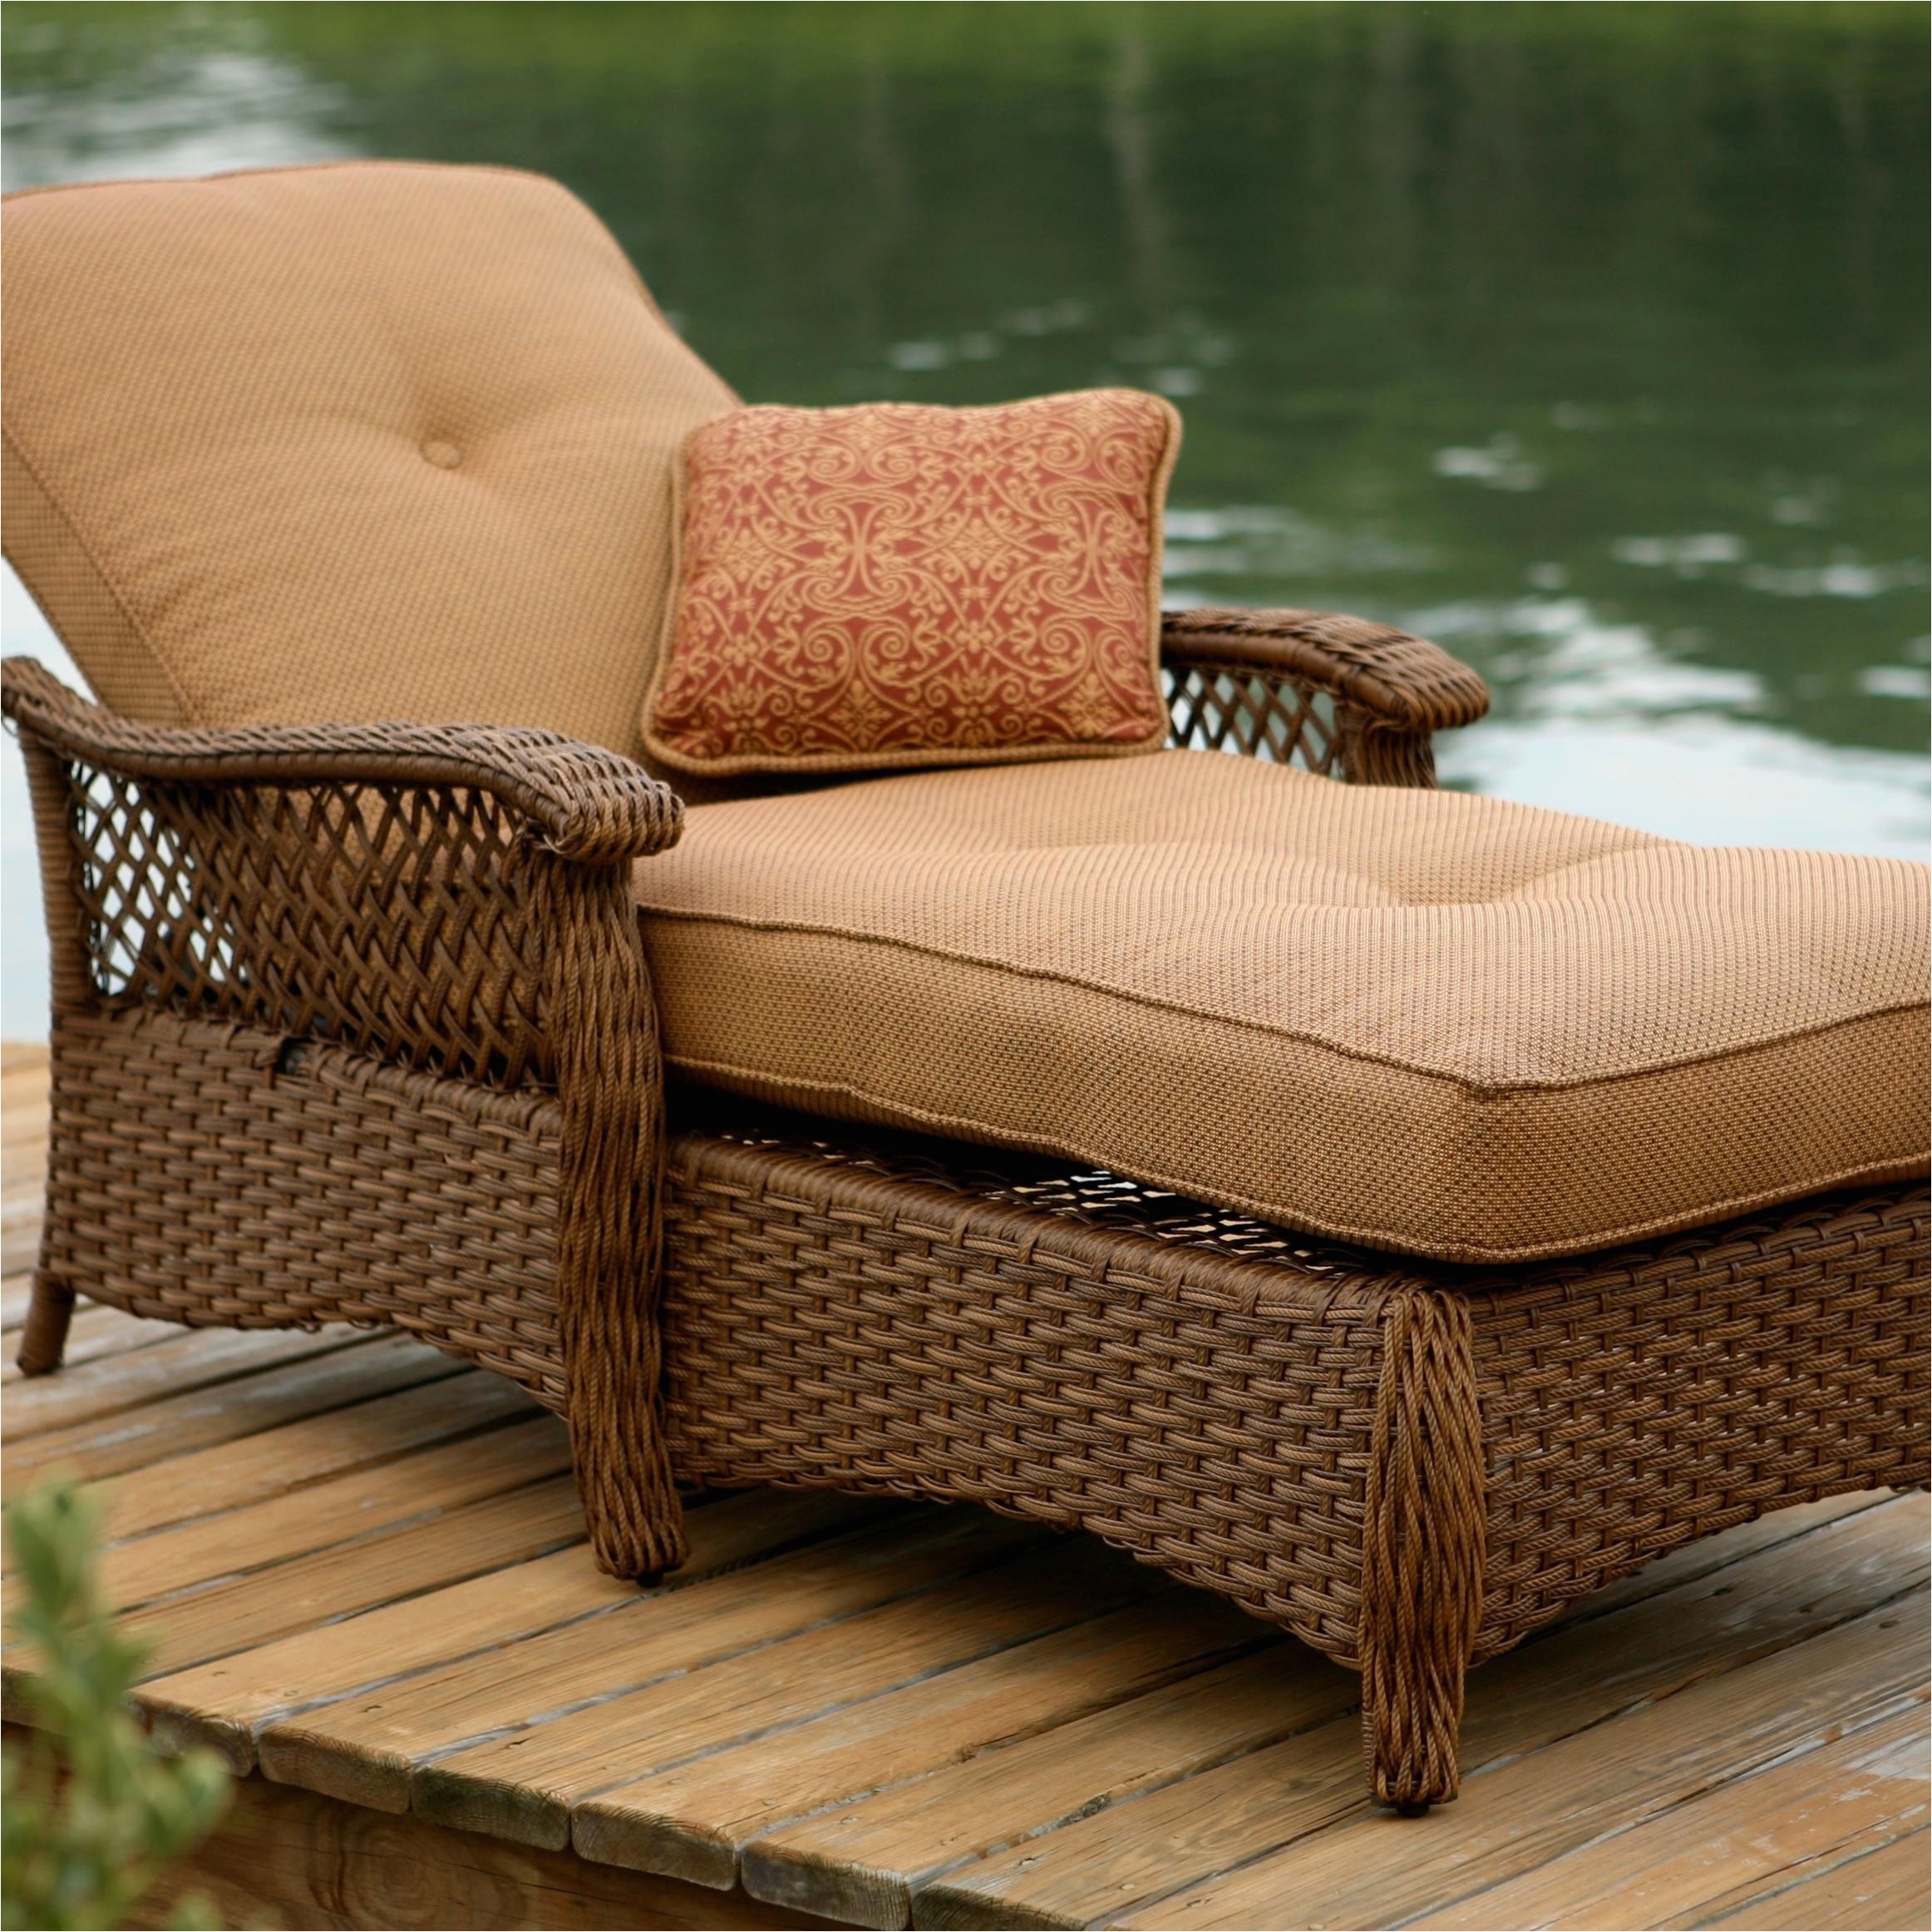 replacement sofa seat cushions inspirational extraordinary outdoor furniture sale 15 wicker sofa 0d patio chairs